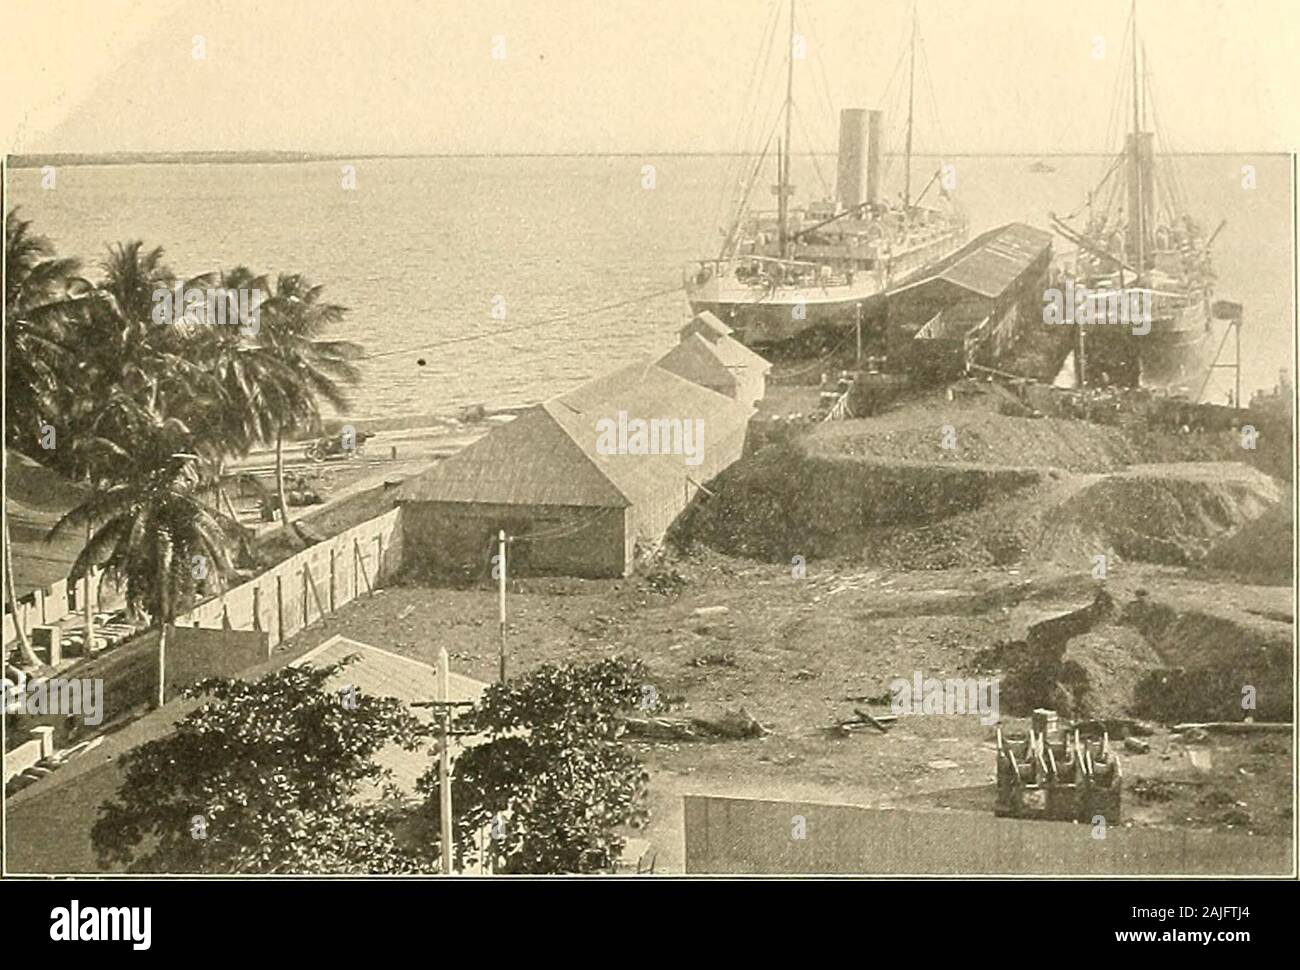 Panama and the canal in picture and prose .. . A YARD AND ITS TENANTS The huts are inconceivably small, a trifle larger than billiard tables CHARACTERISTICS OF THE NATIVE JAMAICAN 19. only about15,000 are listed in thecensus aswhite, andthe whitenessof a goodmany of theseis admittedlytarnished bya touch ofthe tarbrush.As in everycountry inwhich anysocial rela-tion betweenthe races isnot remorse-lessly tabooed—as it is inour southern states—the number of coloredpeople increases more rapidly than that of eitherblack or white. There were in 1834, 15.000 whitesout of the population of 371,000; the Stock Photo